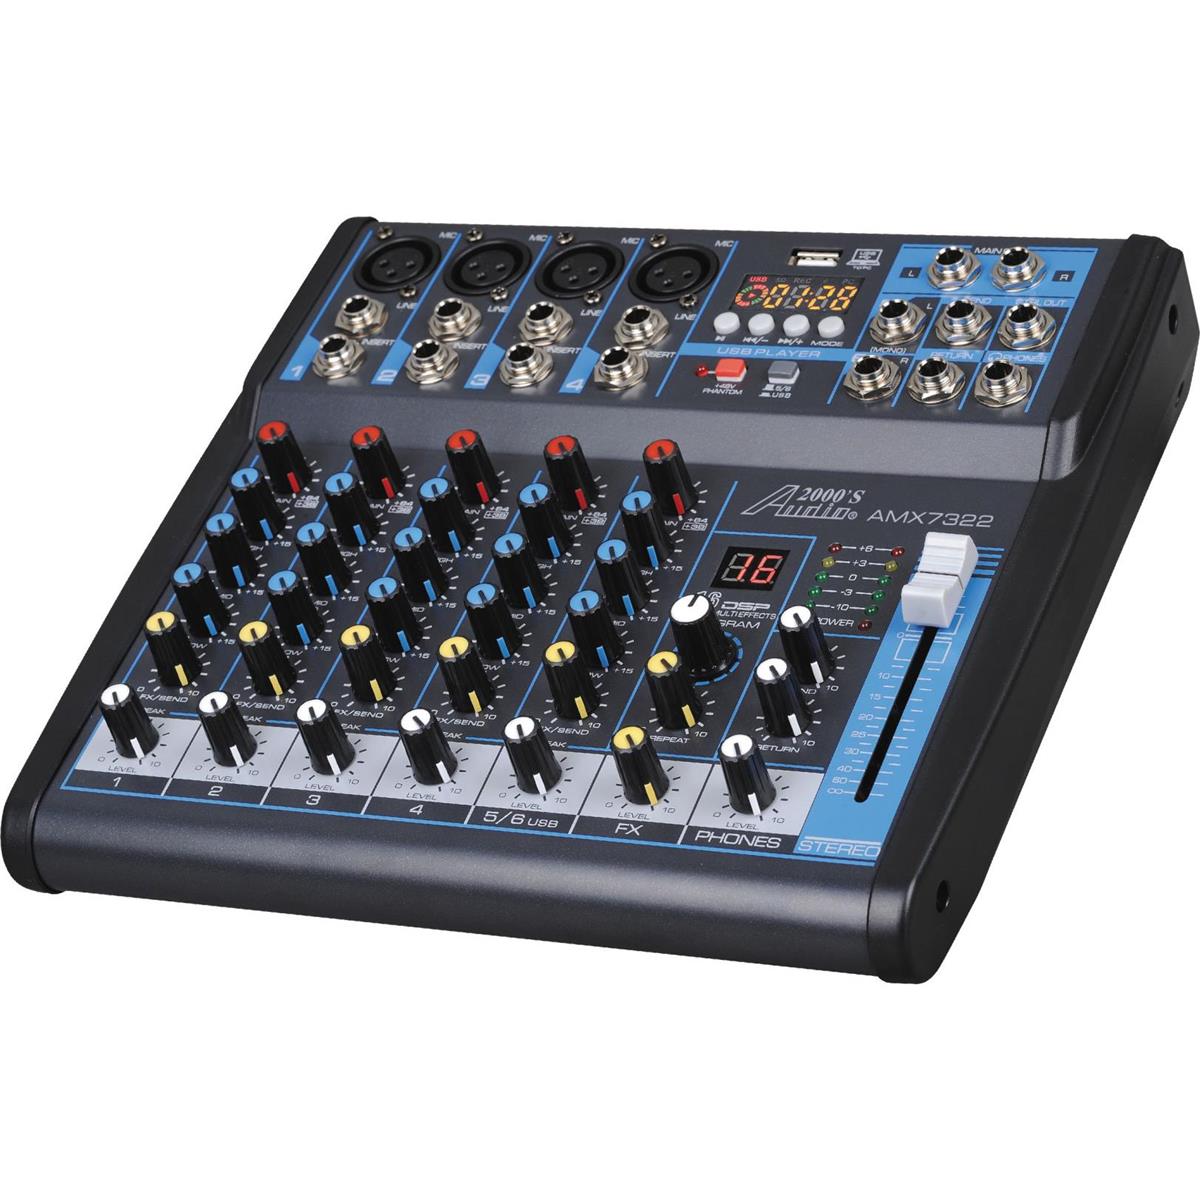 Image of Audio 2000s AMX7322 6-CH Audio Mixer with USB